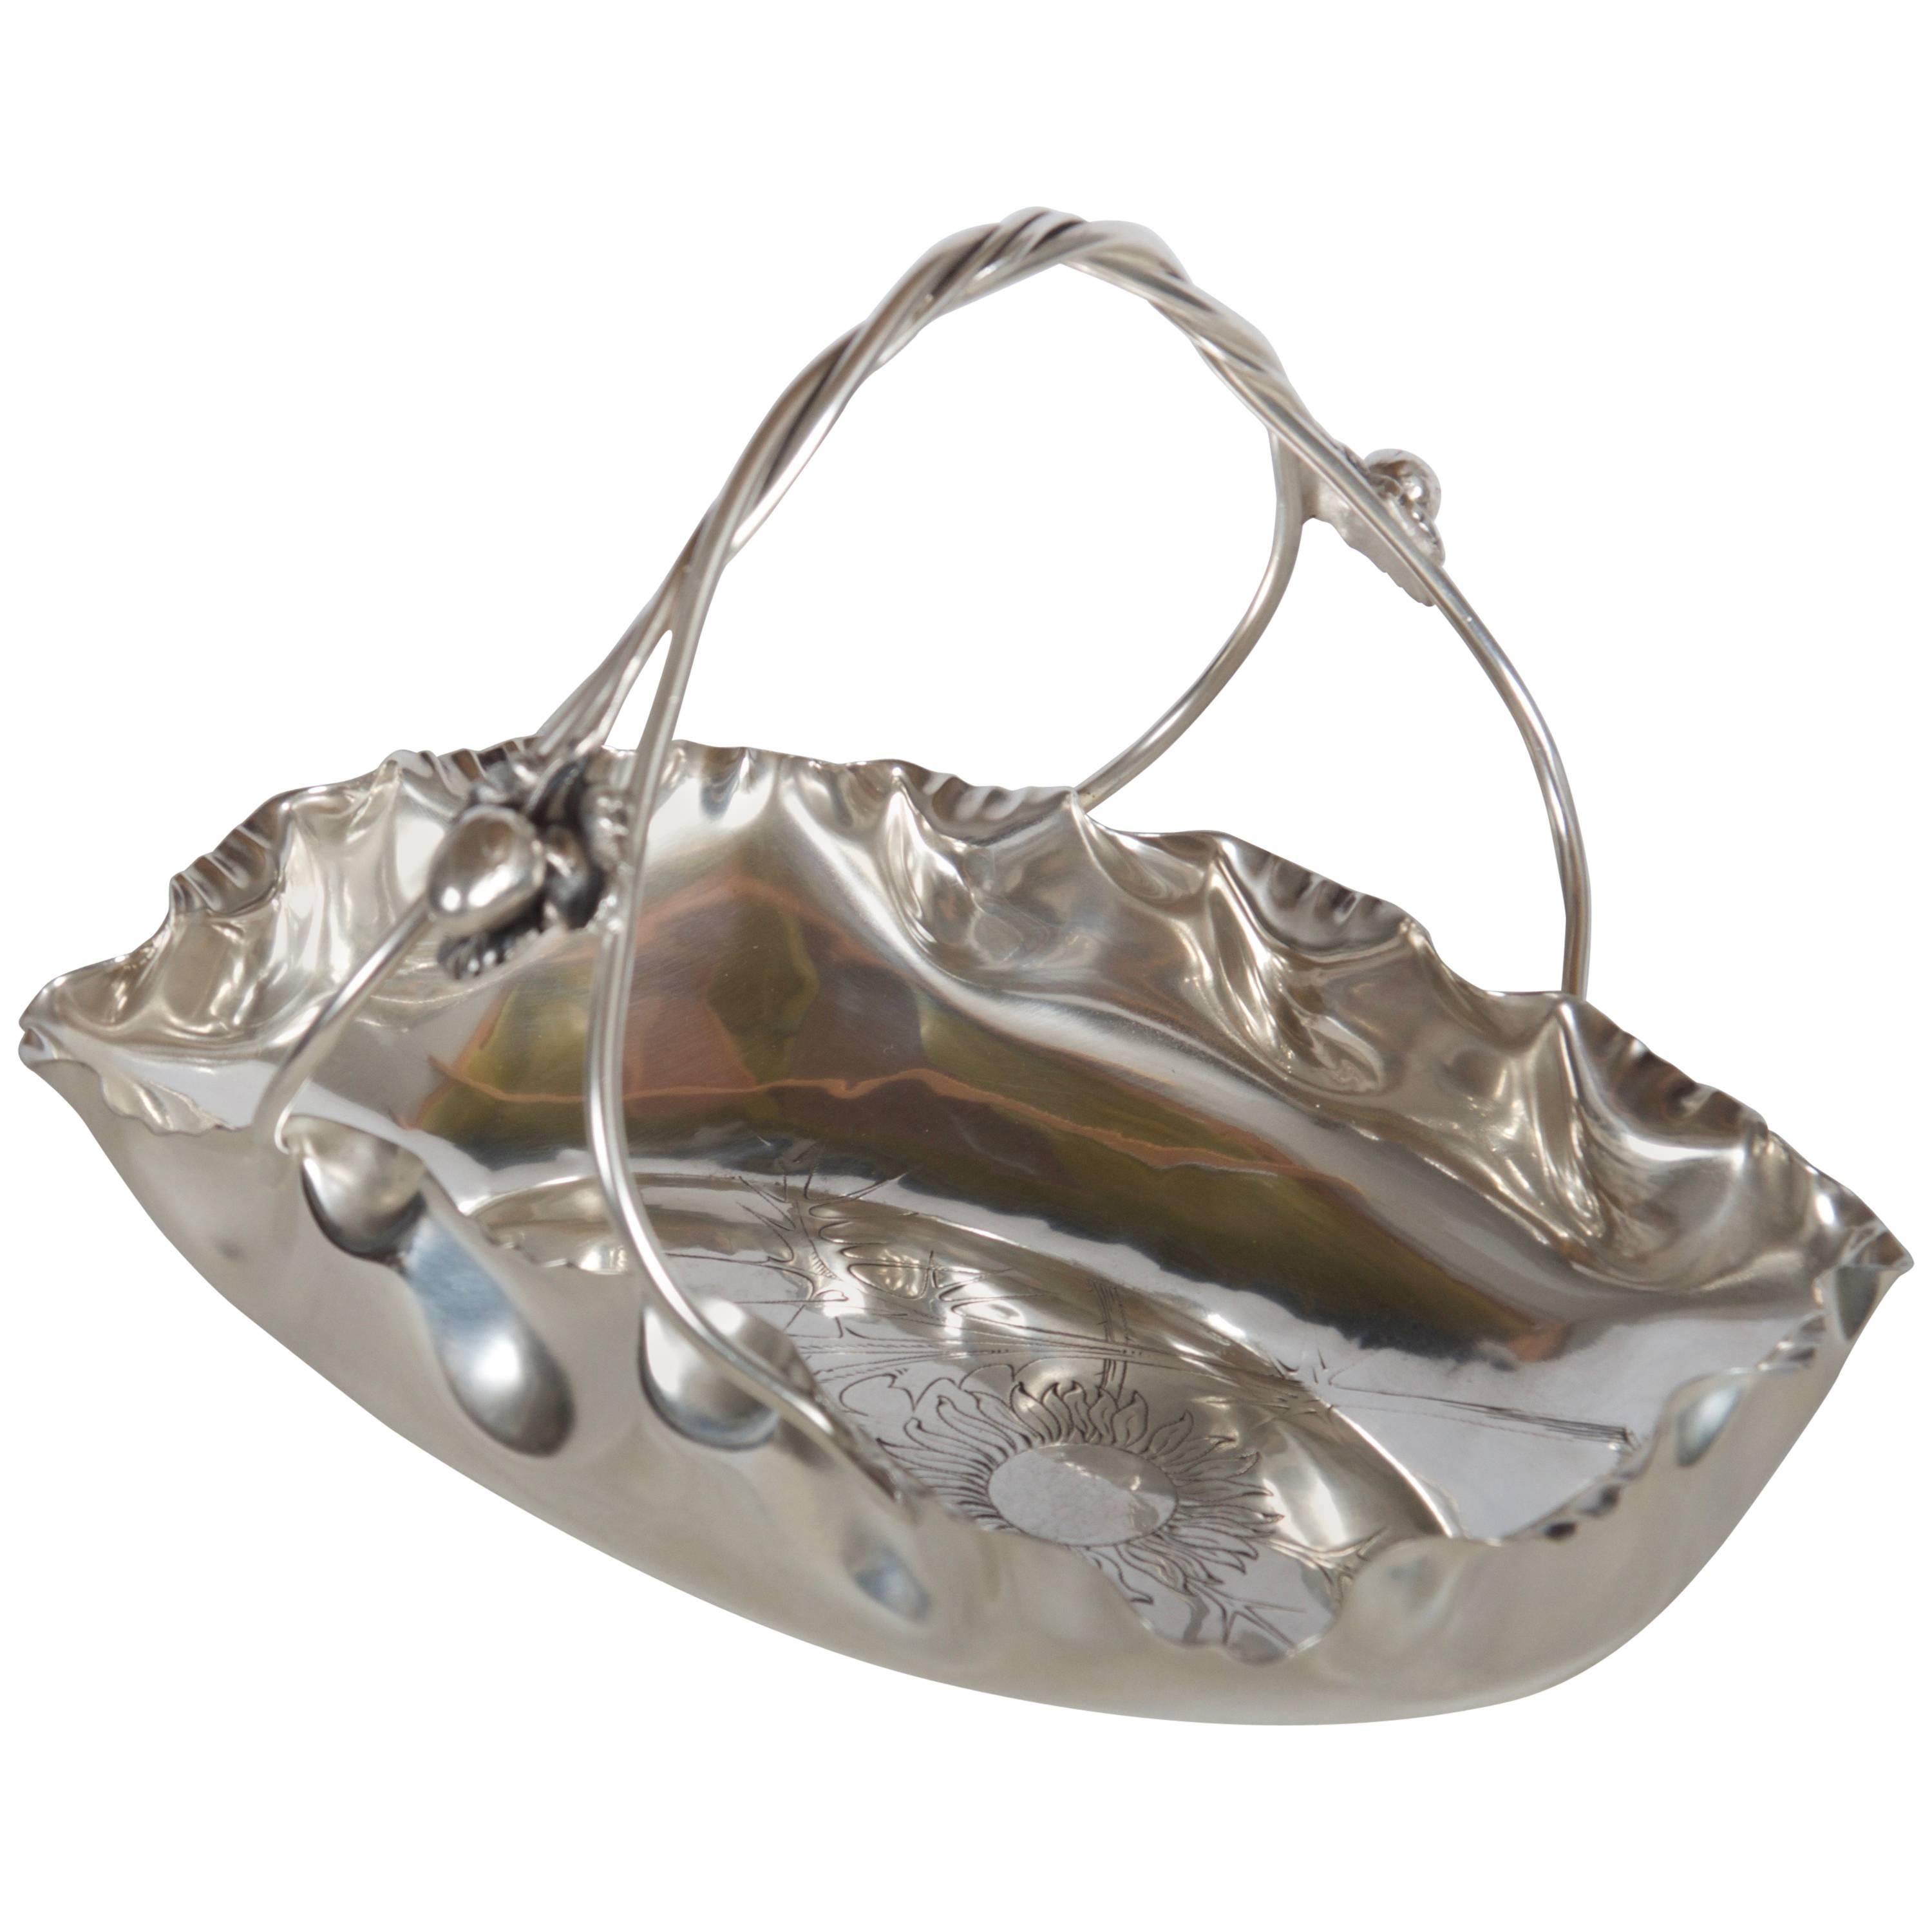 Art Nouveau Shell with Handle by Albert Koehler